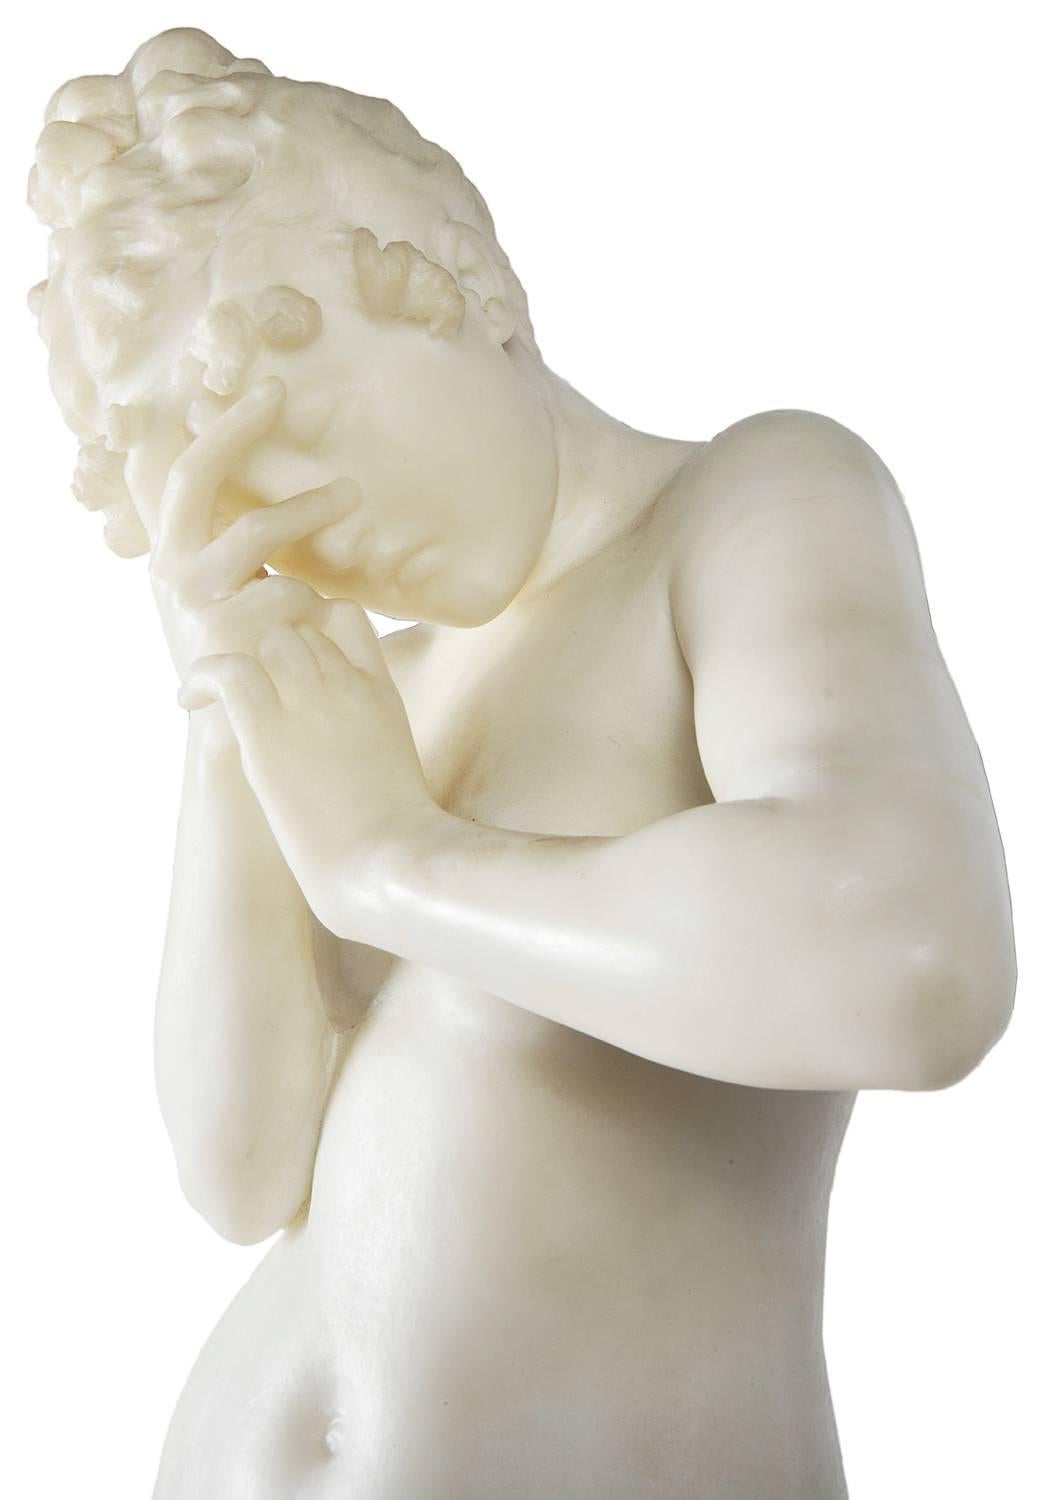 A very good quality late 19th century Italian marble statue of a nude maiden, signed E Rosa.